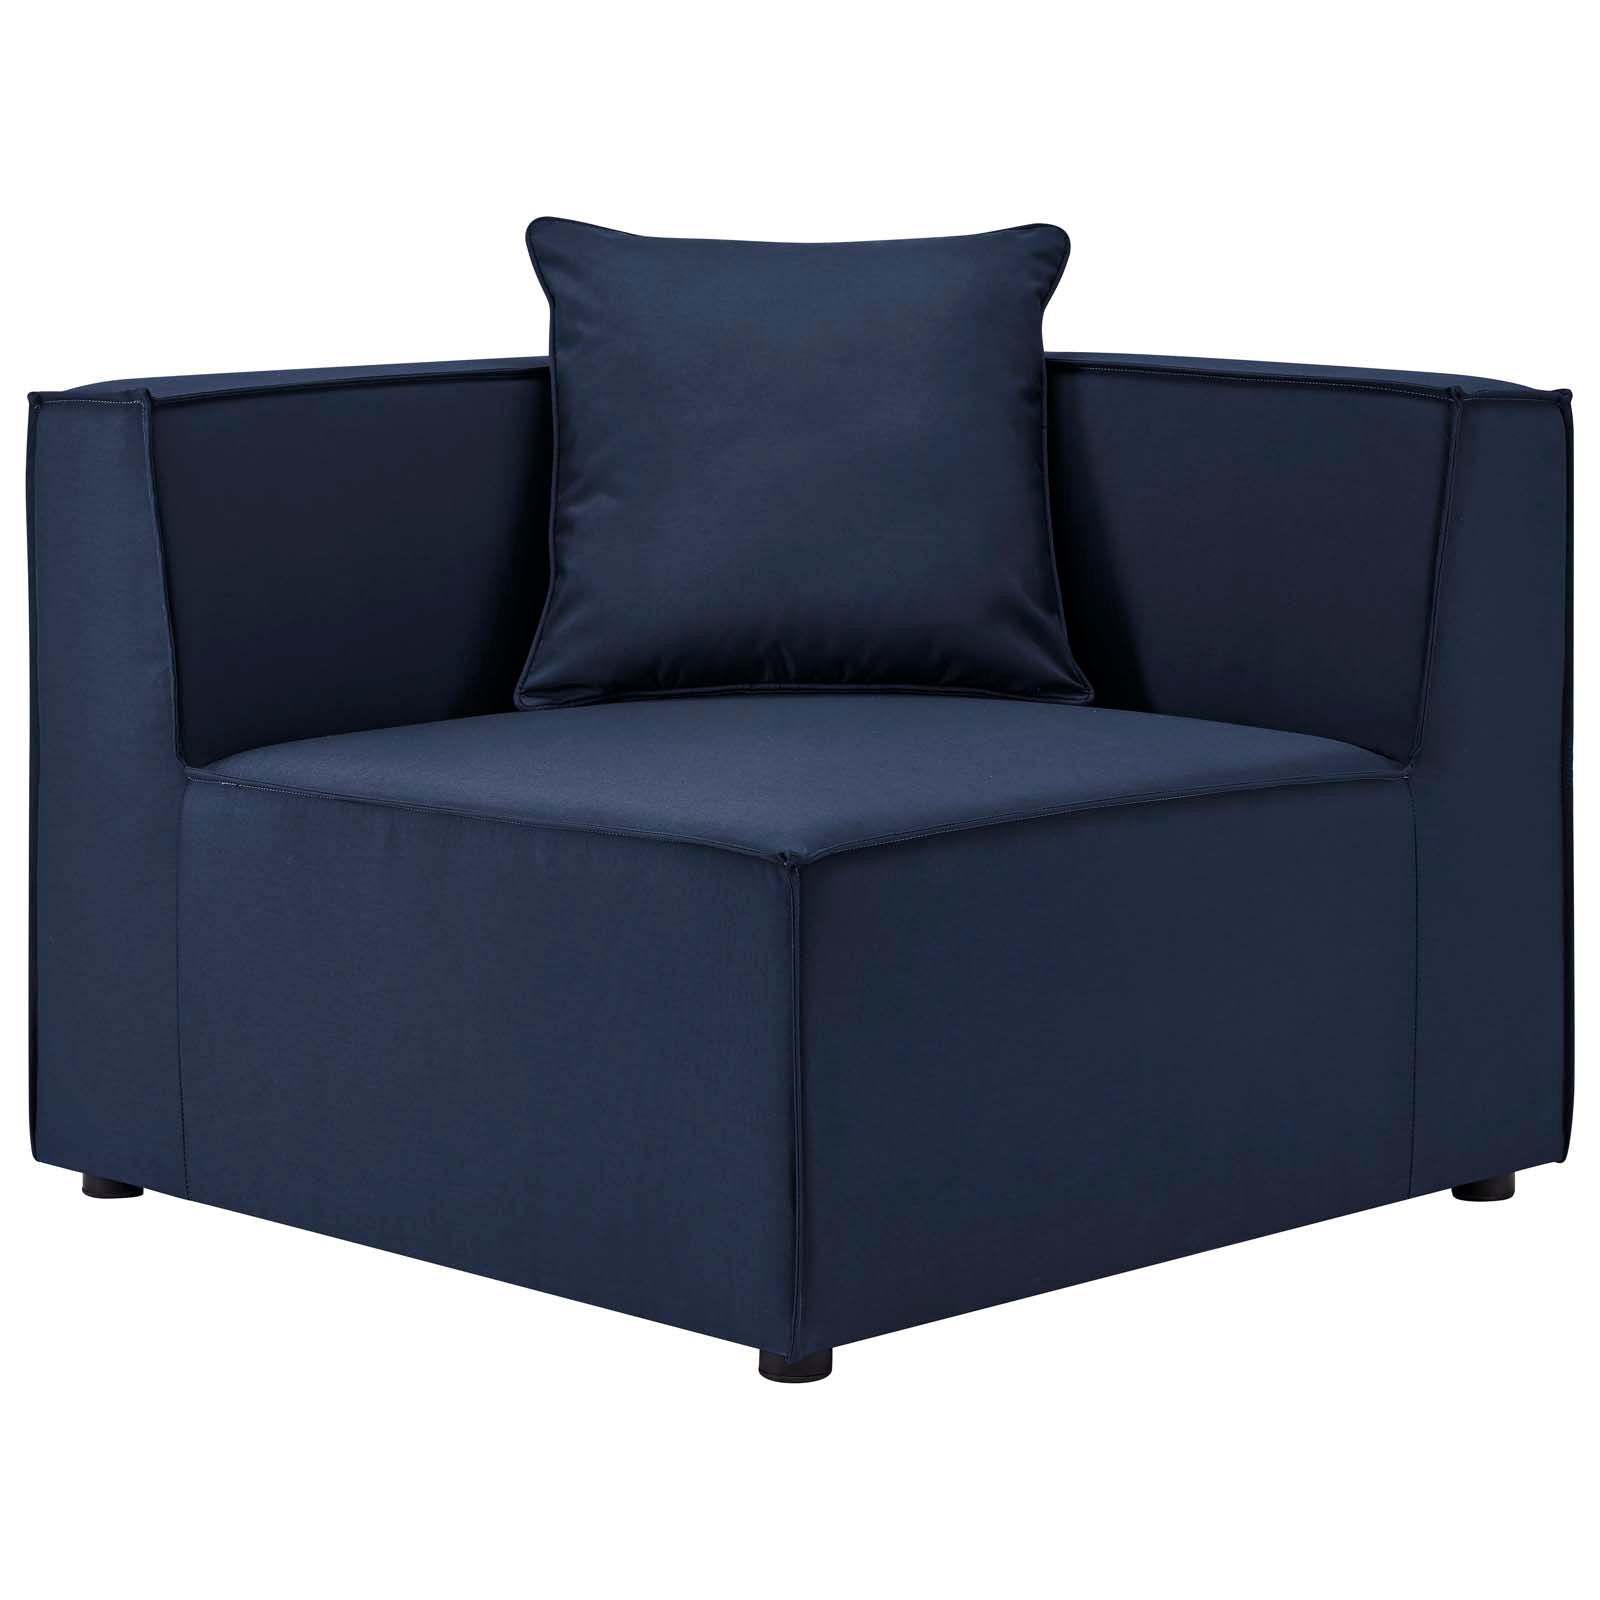 Saybrook Outdoor Patio Upholstered Sectional Sofa Corner Chair